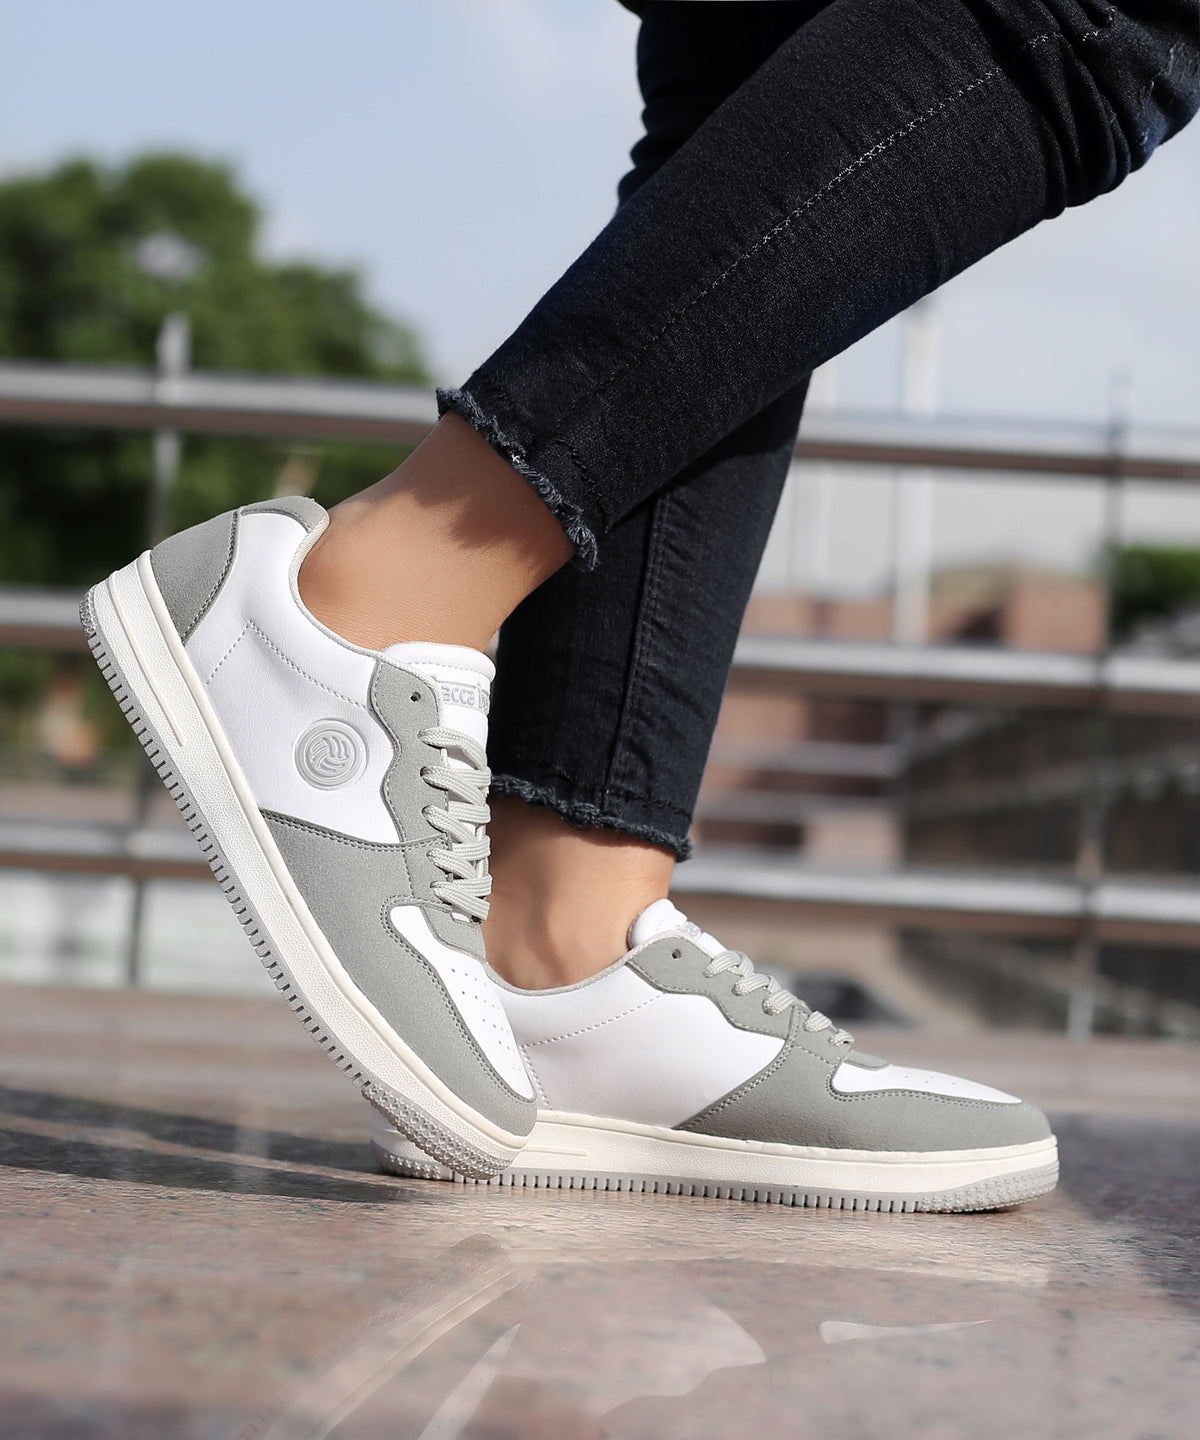 Women's On White Sneakers & Athletic Shoes | Nordstrom